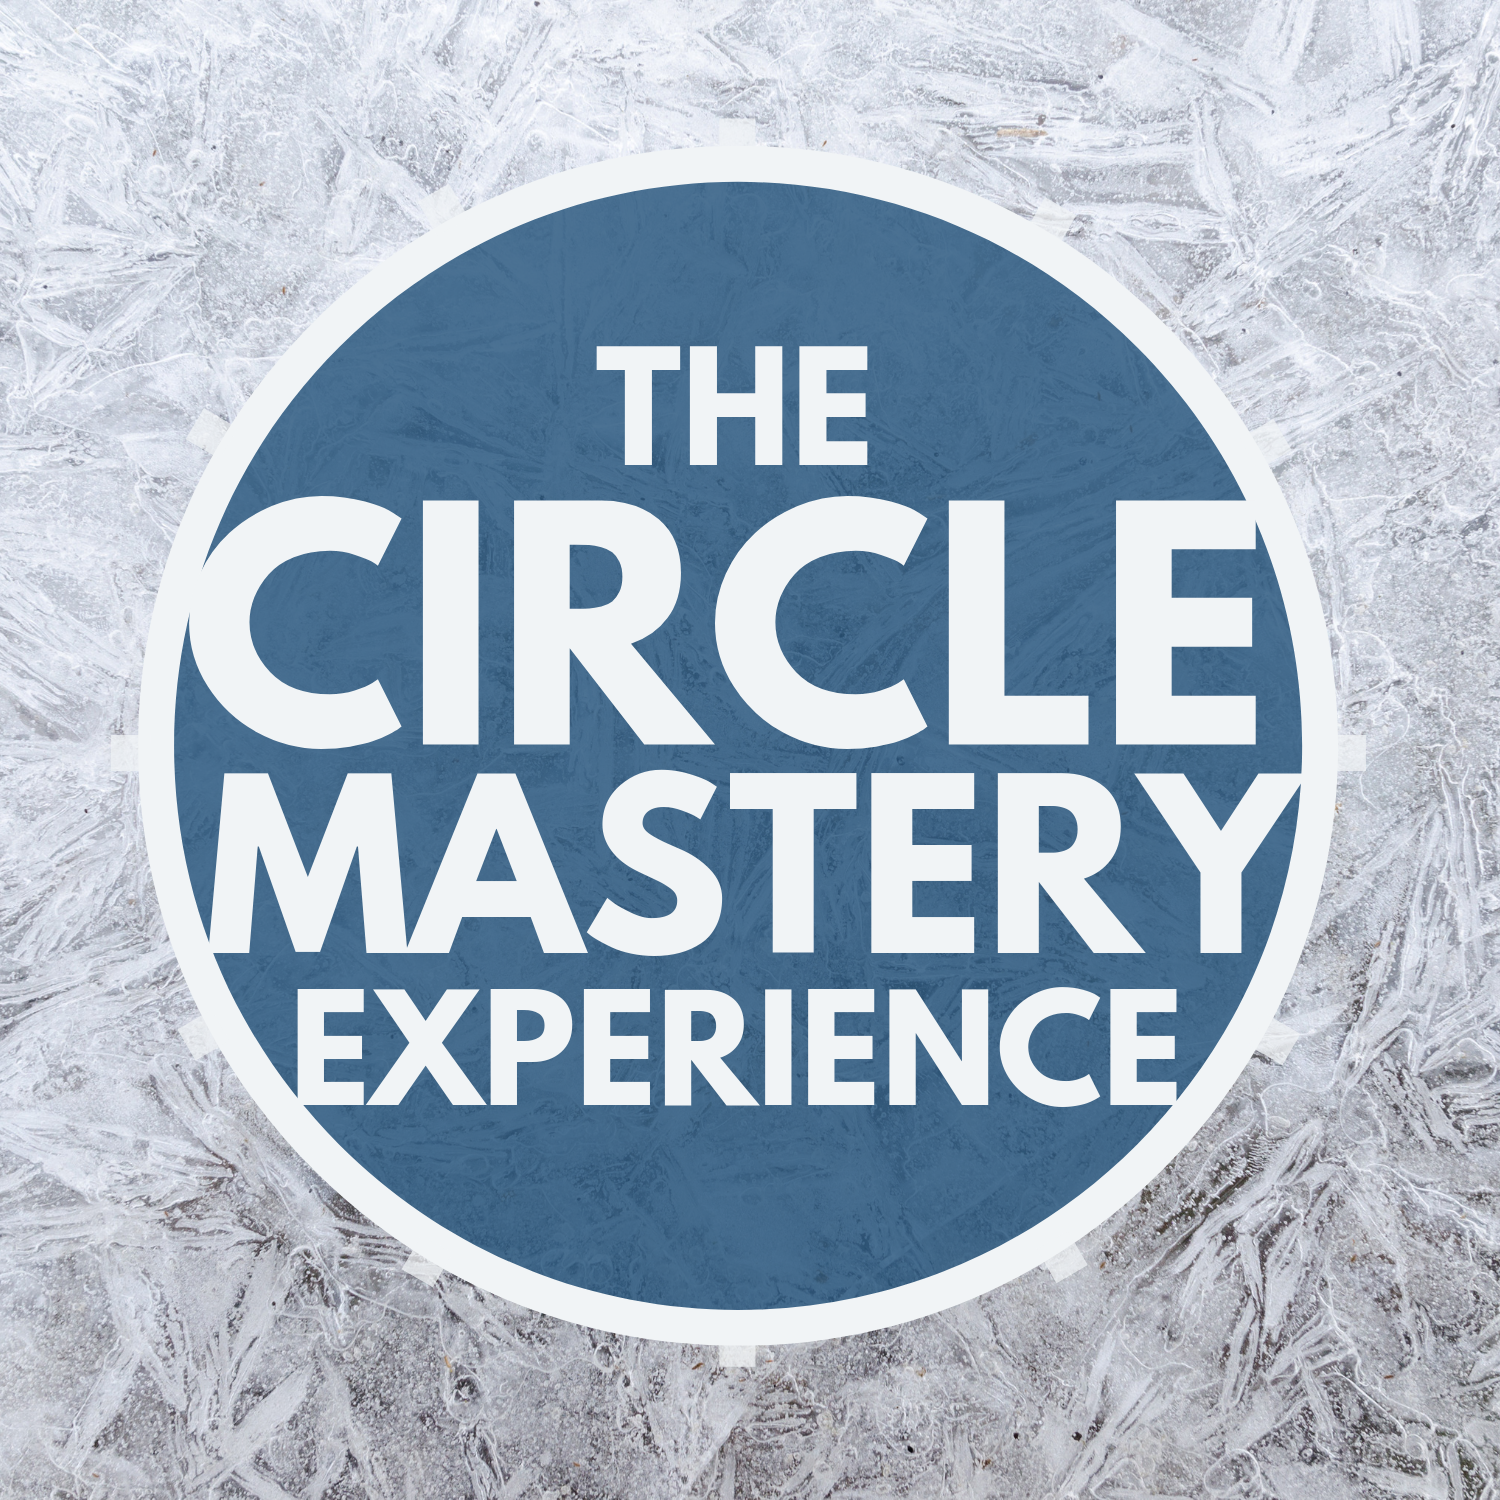 The Circle Mastery Experience